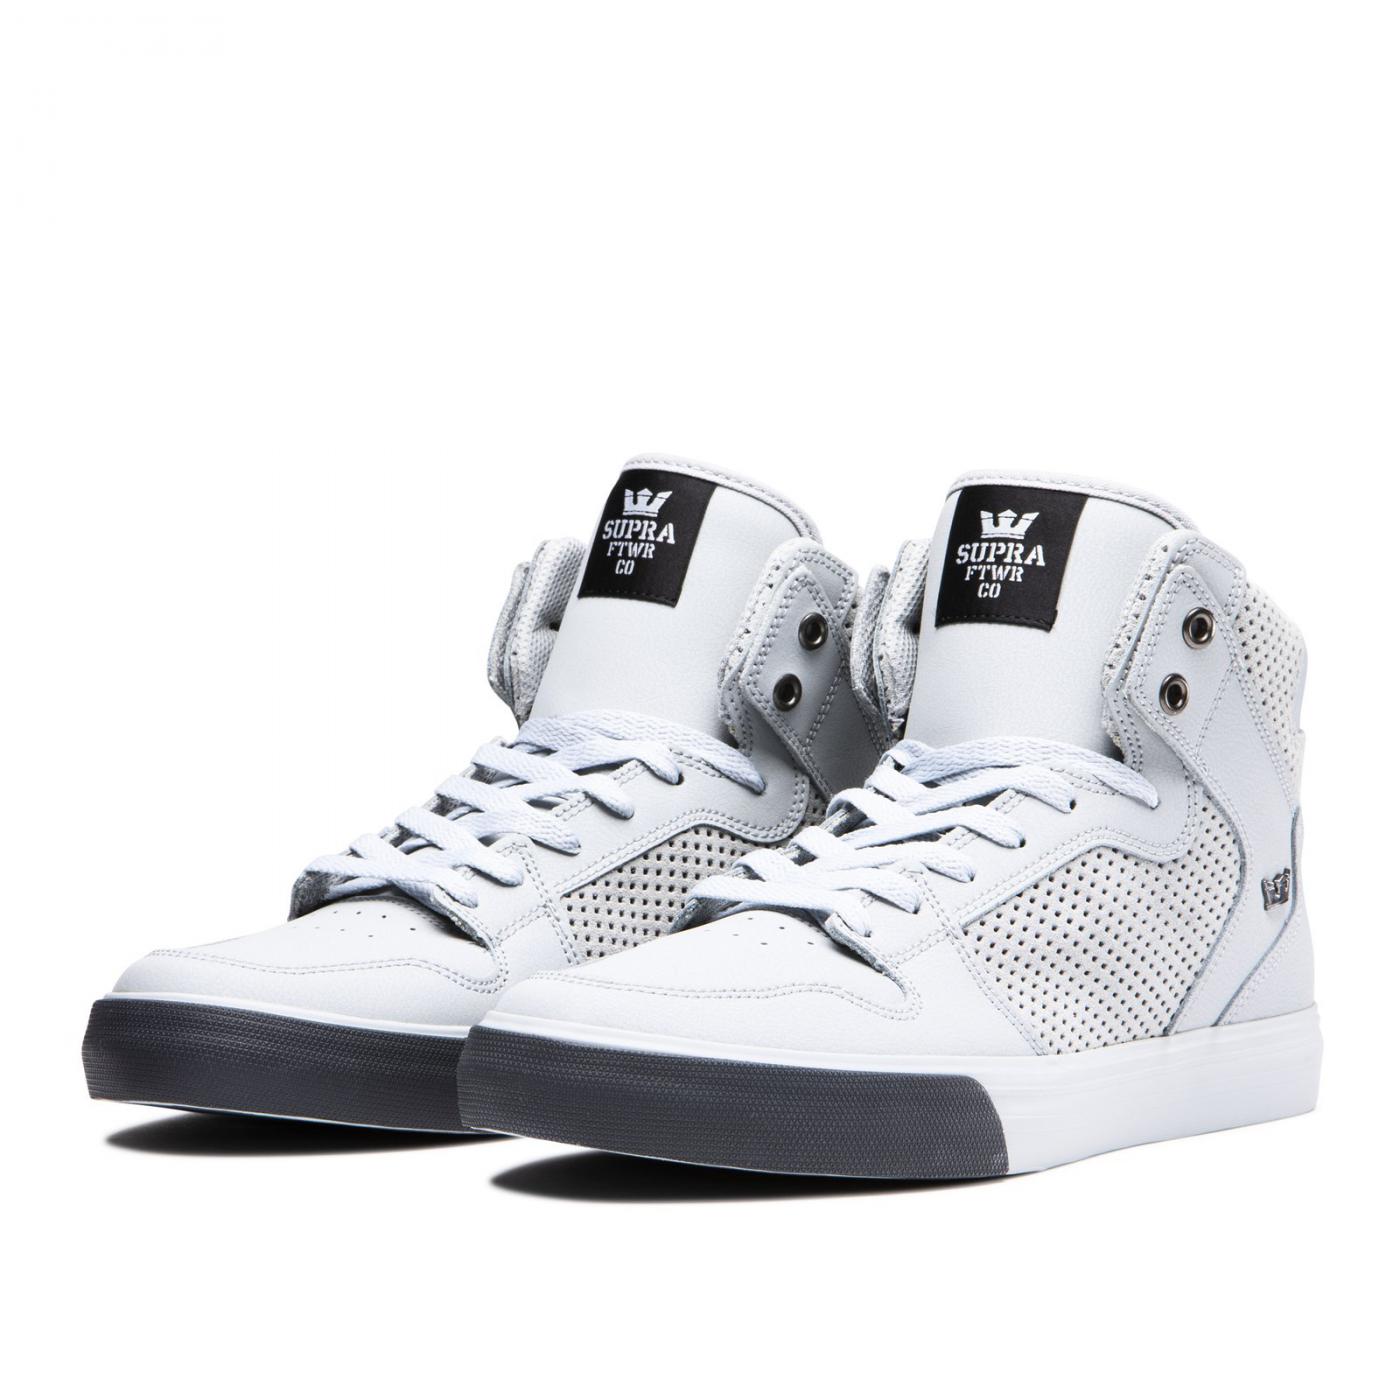 Vaider High Top Skate Shoes 